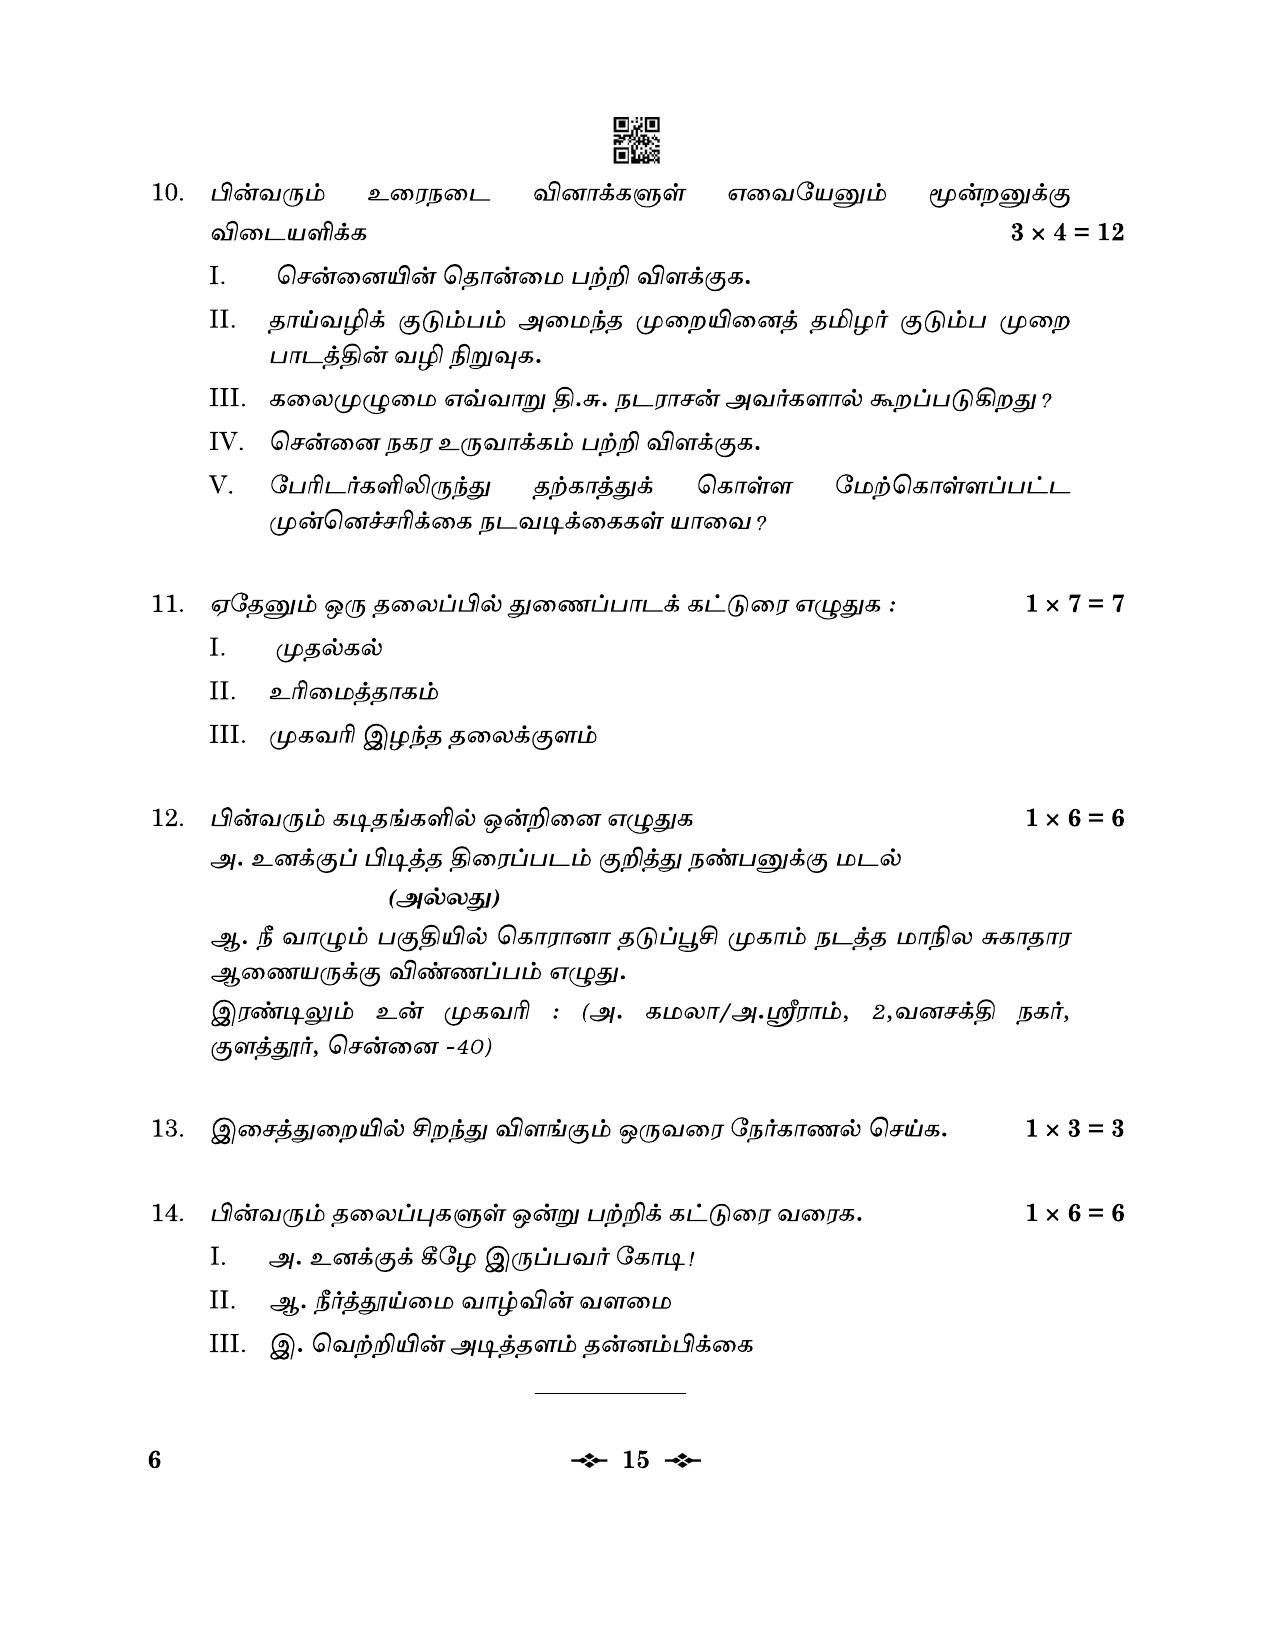 CBSE Class 12 6_Tamil 2023 Question Paper - Page 15